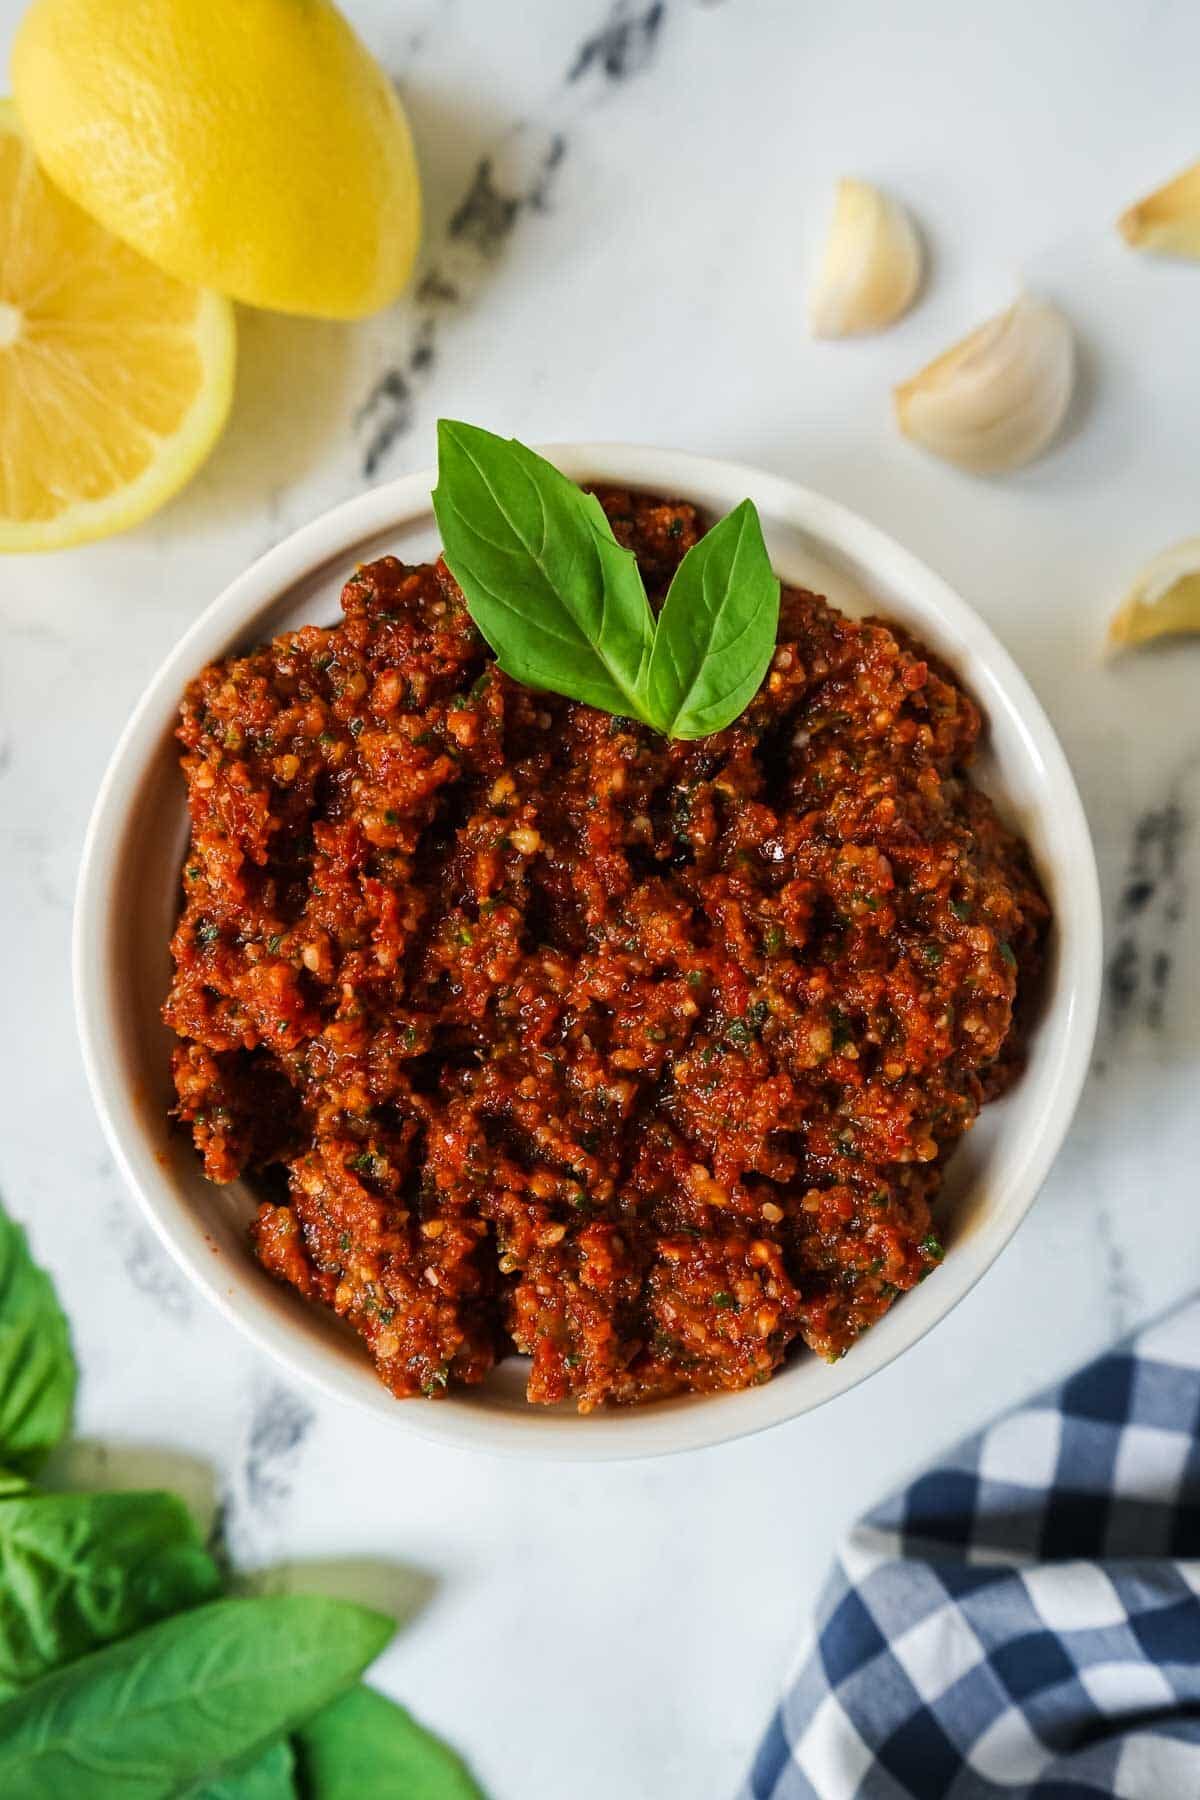 Sun dried tomato pesto in a white bowl garnished with two basil leaves.